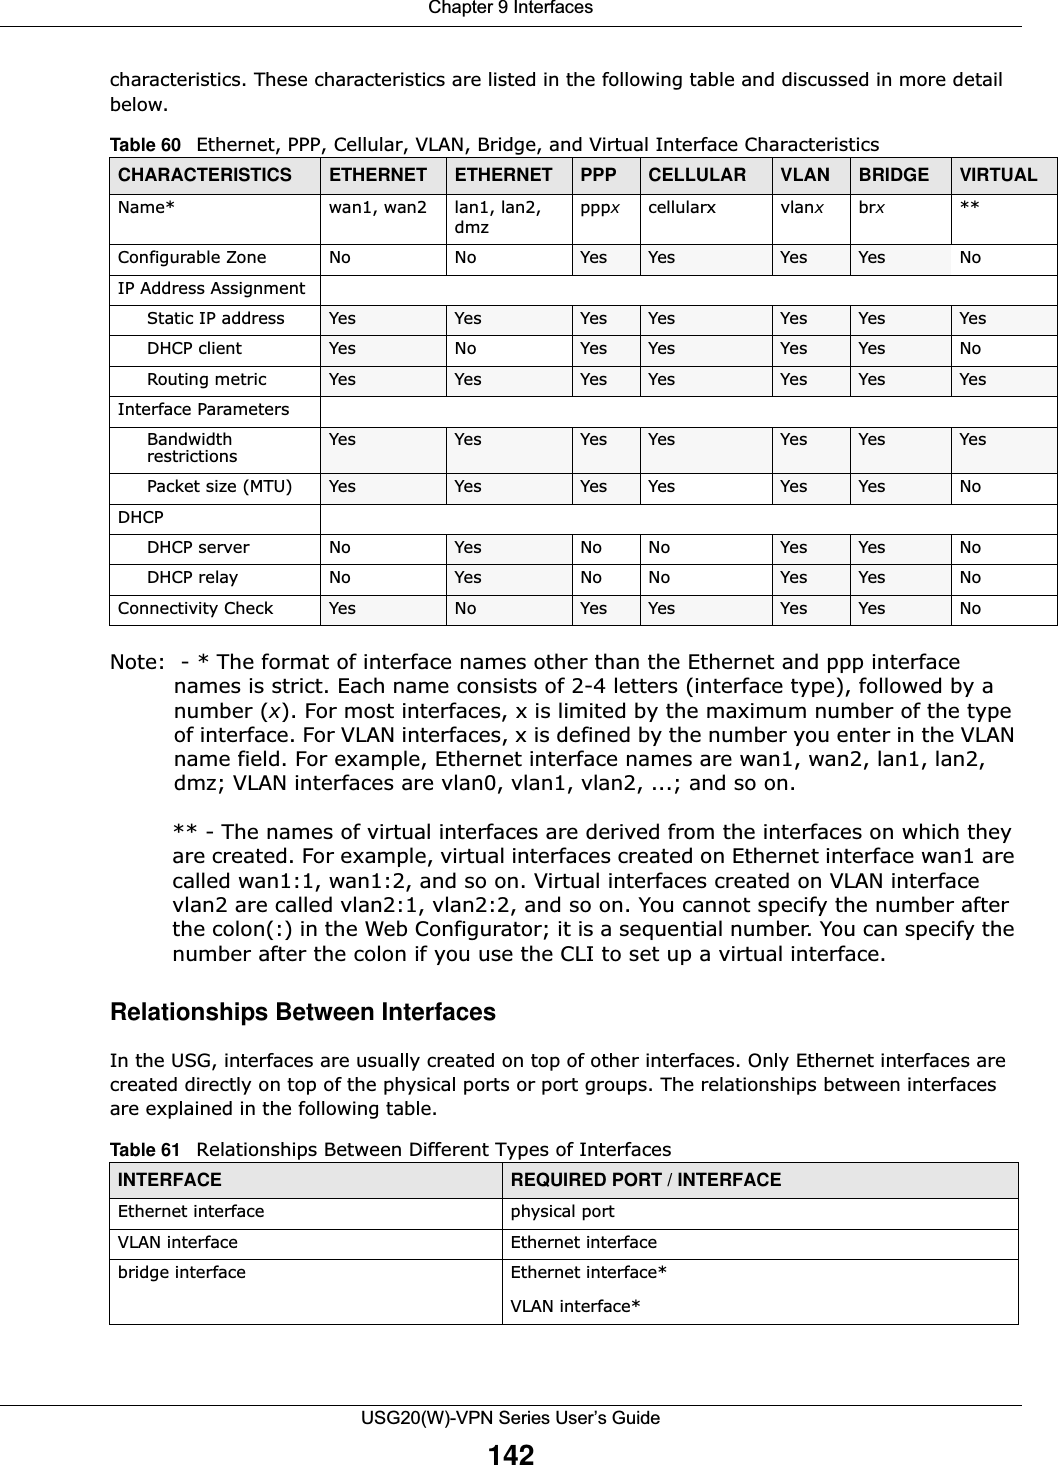 Chapter 9 InterfacesUSG20(W)-VPN Series User’s Guide142characteristics. These characteristics are listed in the following table and discussed in more detail below.Note:  - * The format of interface names other than the Ethernet and ppp interface names is strict. Each name consists of 2-4 letters (interface type), followed by a number (x). For most interfaces, x is limited by the maximum number of the type of interface. For VLAN interfaces, x is defined by the number you enter in the VLAN name field. For example, Ethernet interface names are wan1, wan2, lan1, lan2, dmz; VLAN interfaces are vlan0, vlan1, vlan2, ...; and so on.** - The names of virtual interfaces are derived from the interfaces on which they are created. For example, virtual interfaces created on Ethernet interface wan1 are called wan1:1, wan1:2, and so on. Virtual interfaces created on VLAN interface vlan2 are called vlan2:1, vlan2:2, and so on. You cannot specify the number after the colon(:) in the Web Configurator; it is a sequential number. You can specify the number after the colon if you use the CLI to set up a virtual interface.Relationships Between InterfacesIn the USG, interfaces are usually created on top of other interfaces. Only Ethernet interfaces are created directly on top of the physical ports or port groups. The relationships between interfaces are explained in the following table. Table 60   Ethernet, PPP, Cellular, VLAN, Bridge, and Virtual Interface CharacteristicsCHARACTERISTICS ETHERNET ETHERNET PPP CELLULAR VLAN BRIDGE VIRTUALName* wan1, wan2 lan1, lan2, dmzpppxcellularx vlanxbrx**Configurable Zone No No Yes Yes Yes Yes NoIP Address AssignmentStatic IP address Yes Yes Yes Yes Yes Yes YesDHCP client Yes No Yes Yes Yes Yes NoRouting metric Yes Yes Yes Yes Yes Yes YesInterface ParametersBandwidth restrictions Yes Yes Yes Yes Yes Yes YesPacket size (MTU) Yes Yes Yes Yes Yes Yes NoDHCPDHCP server No Yes No No Yes Yes NoDHCP relay No Yes No No Yes Yes NoConnectivity Check Yes No Yes Yes Yes Yes NoTable 61   Relationships Between Different Types of InterfacesINTERFACE REQUIRED PORT / INTERFACEEthernet interface physical portVLAN interface Ethernet interfacebridge interface Ethernet interface*VLAN interface*